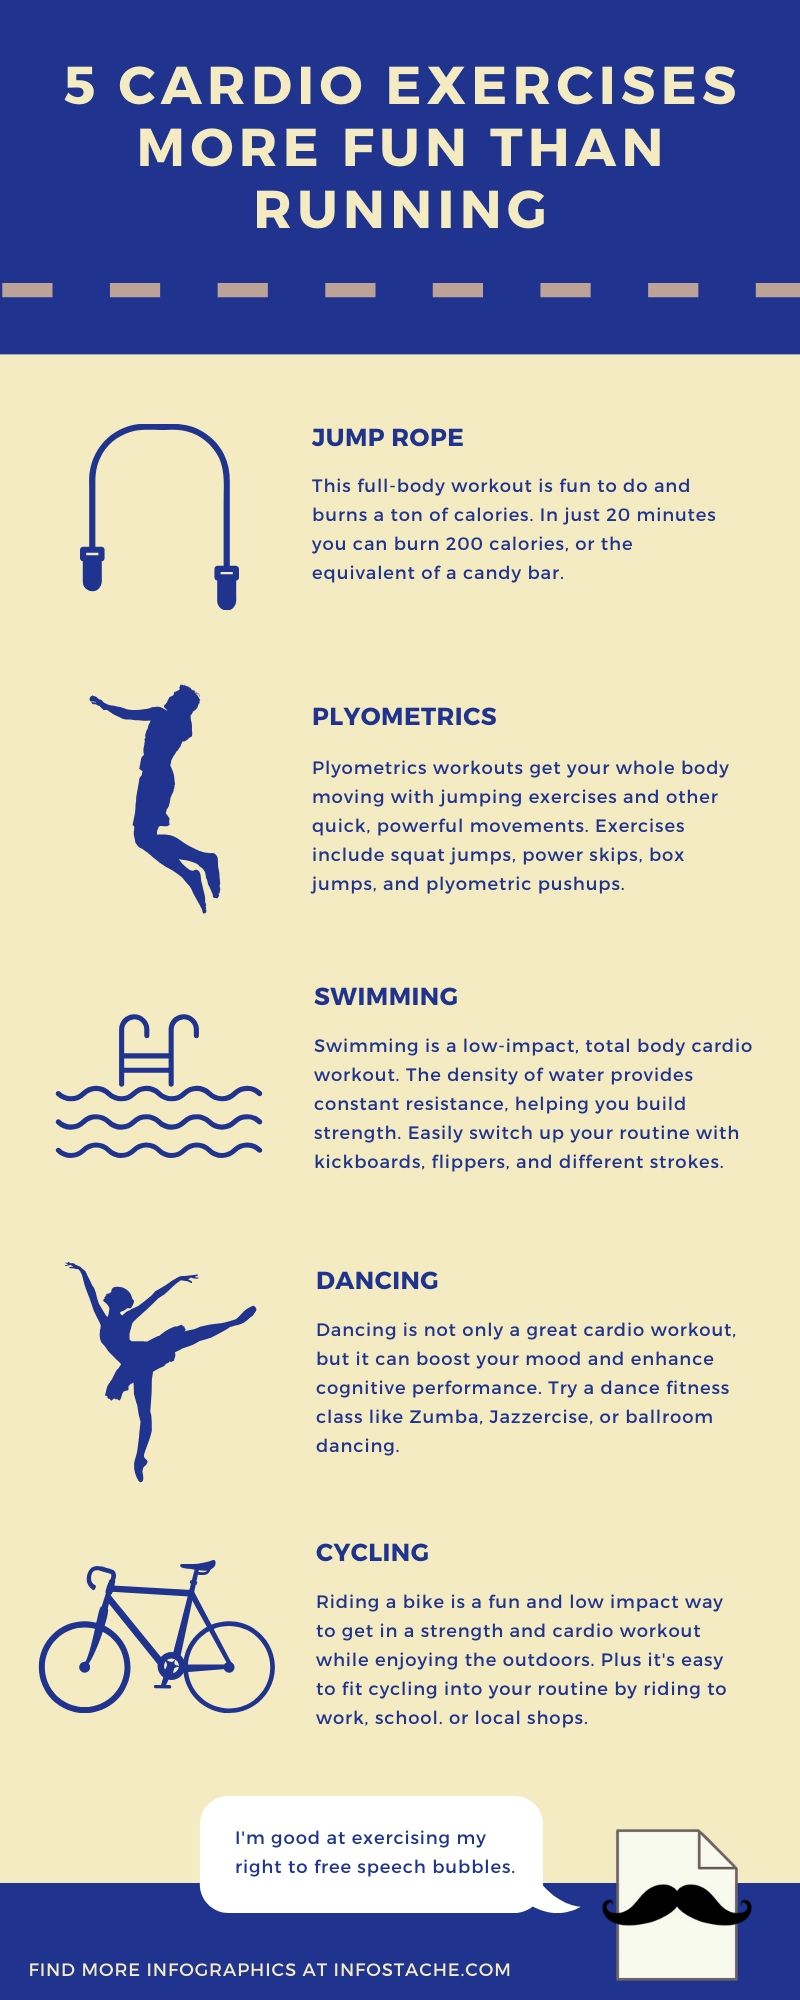 5 Cardio Exercises More Fun Than Running - Infographic